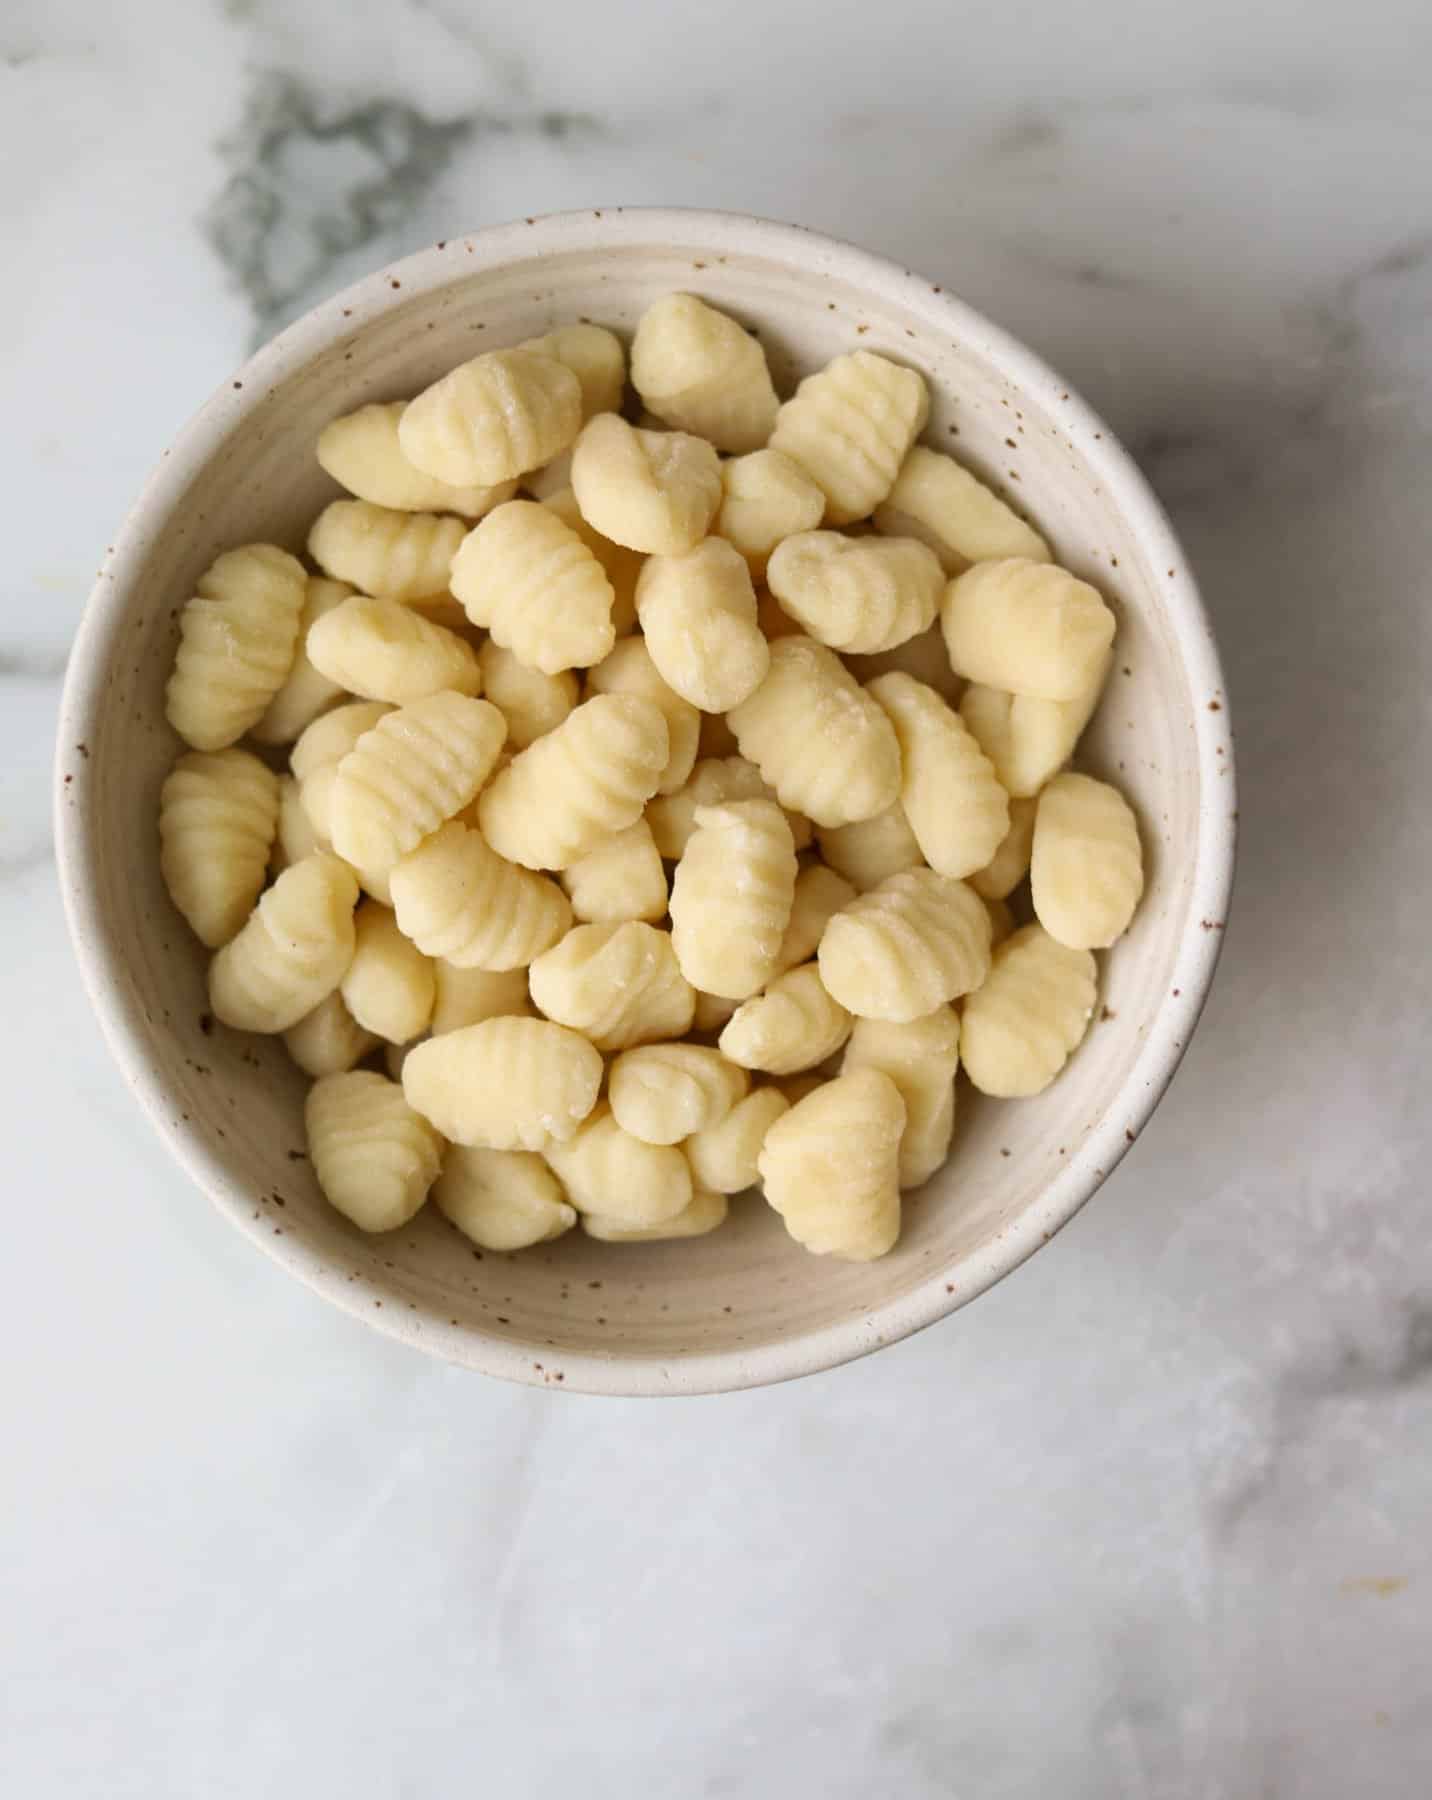 Gnocchi in a speckled bowl.